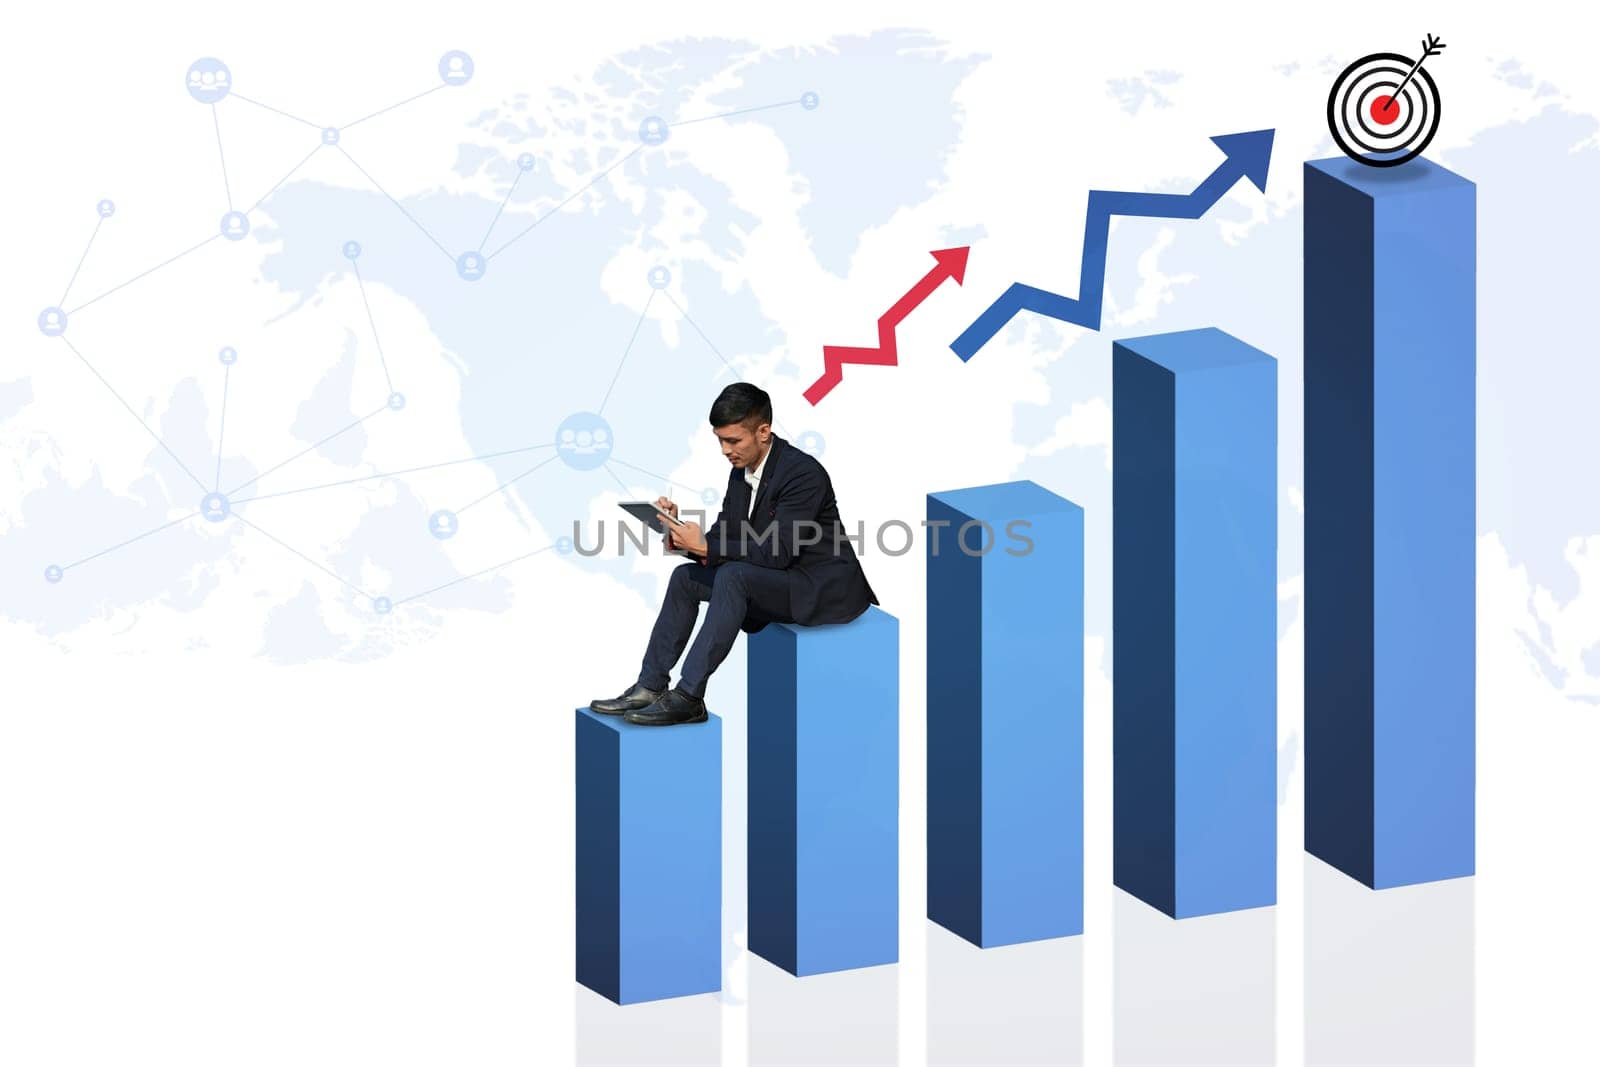 Creative artwork graphics of male economist sitting on increasing graph. Financial growth and success concept by prathanchorruangsak